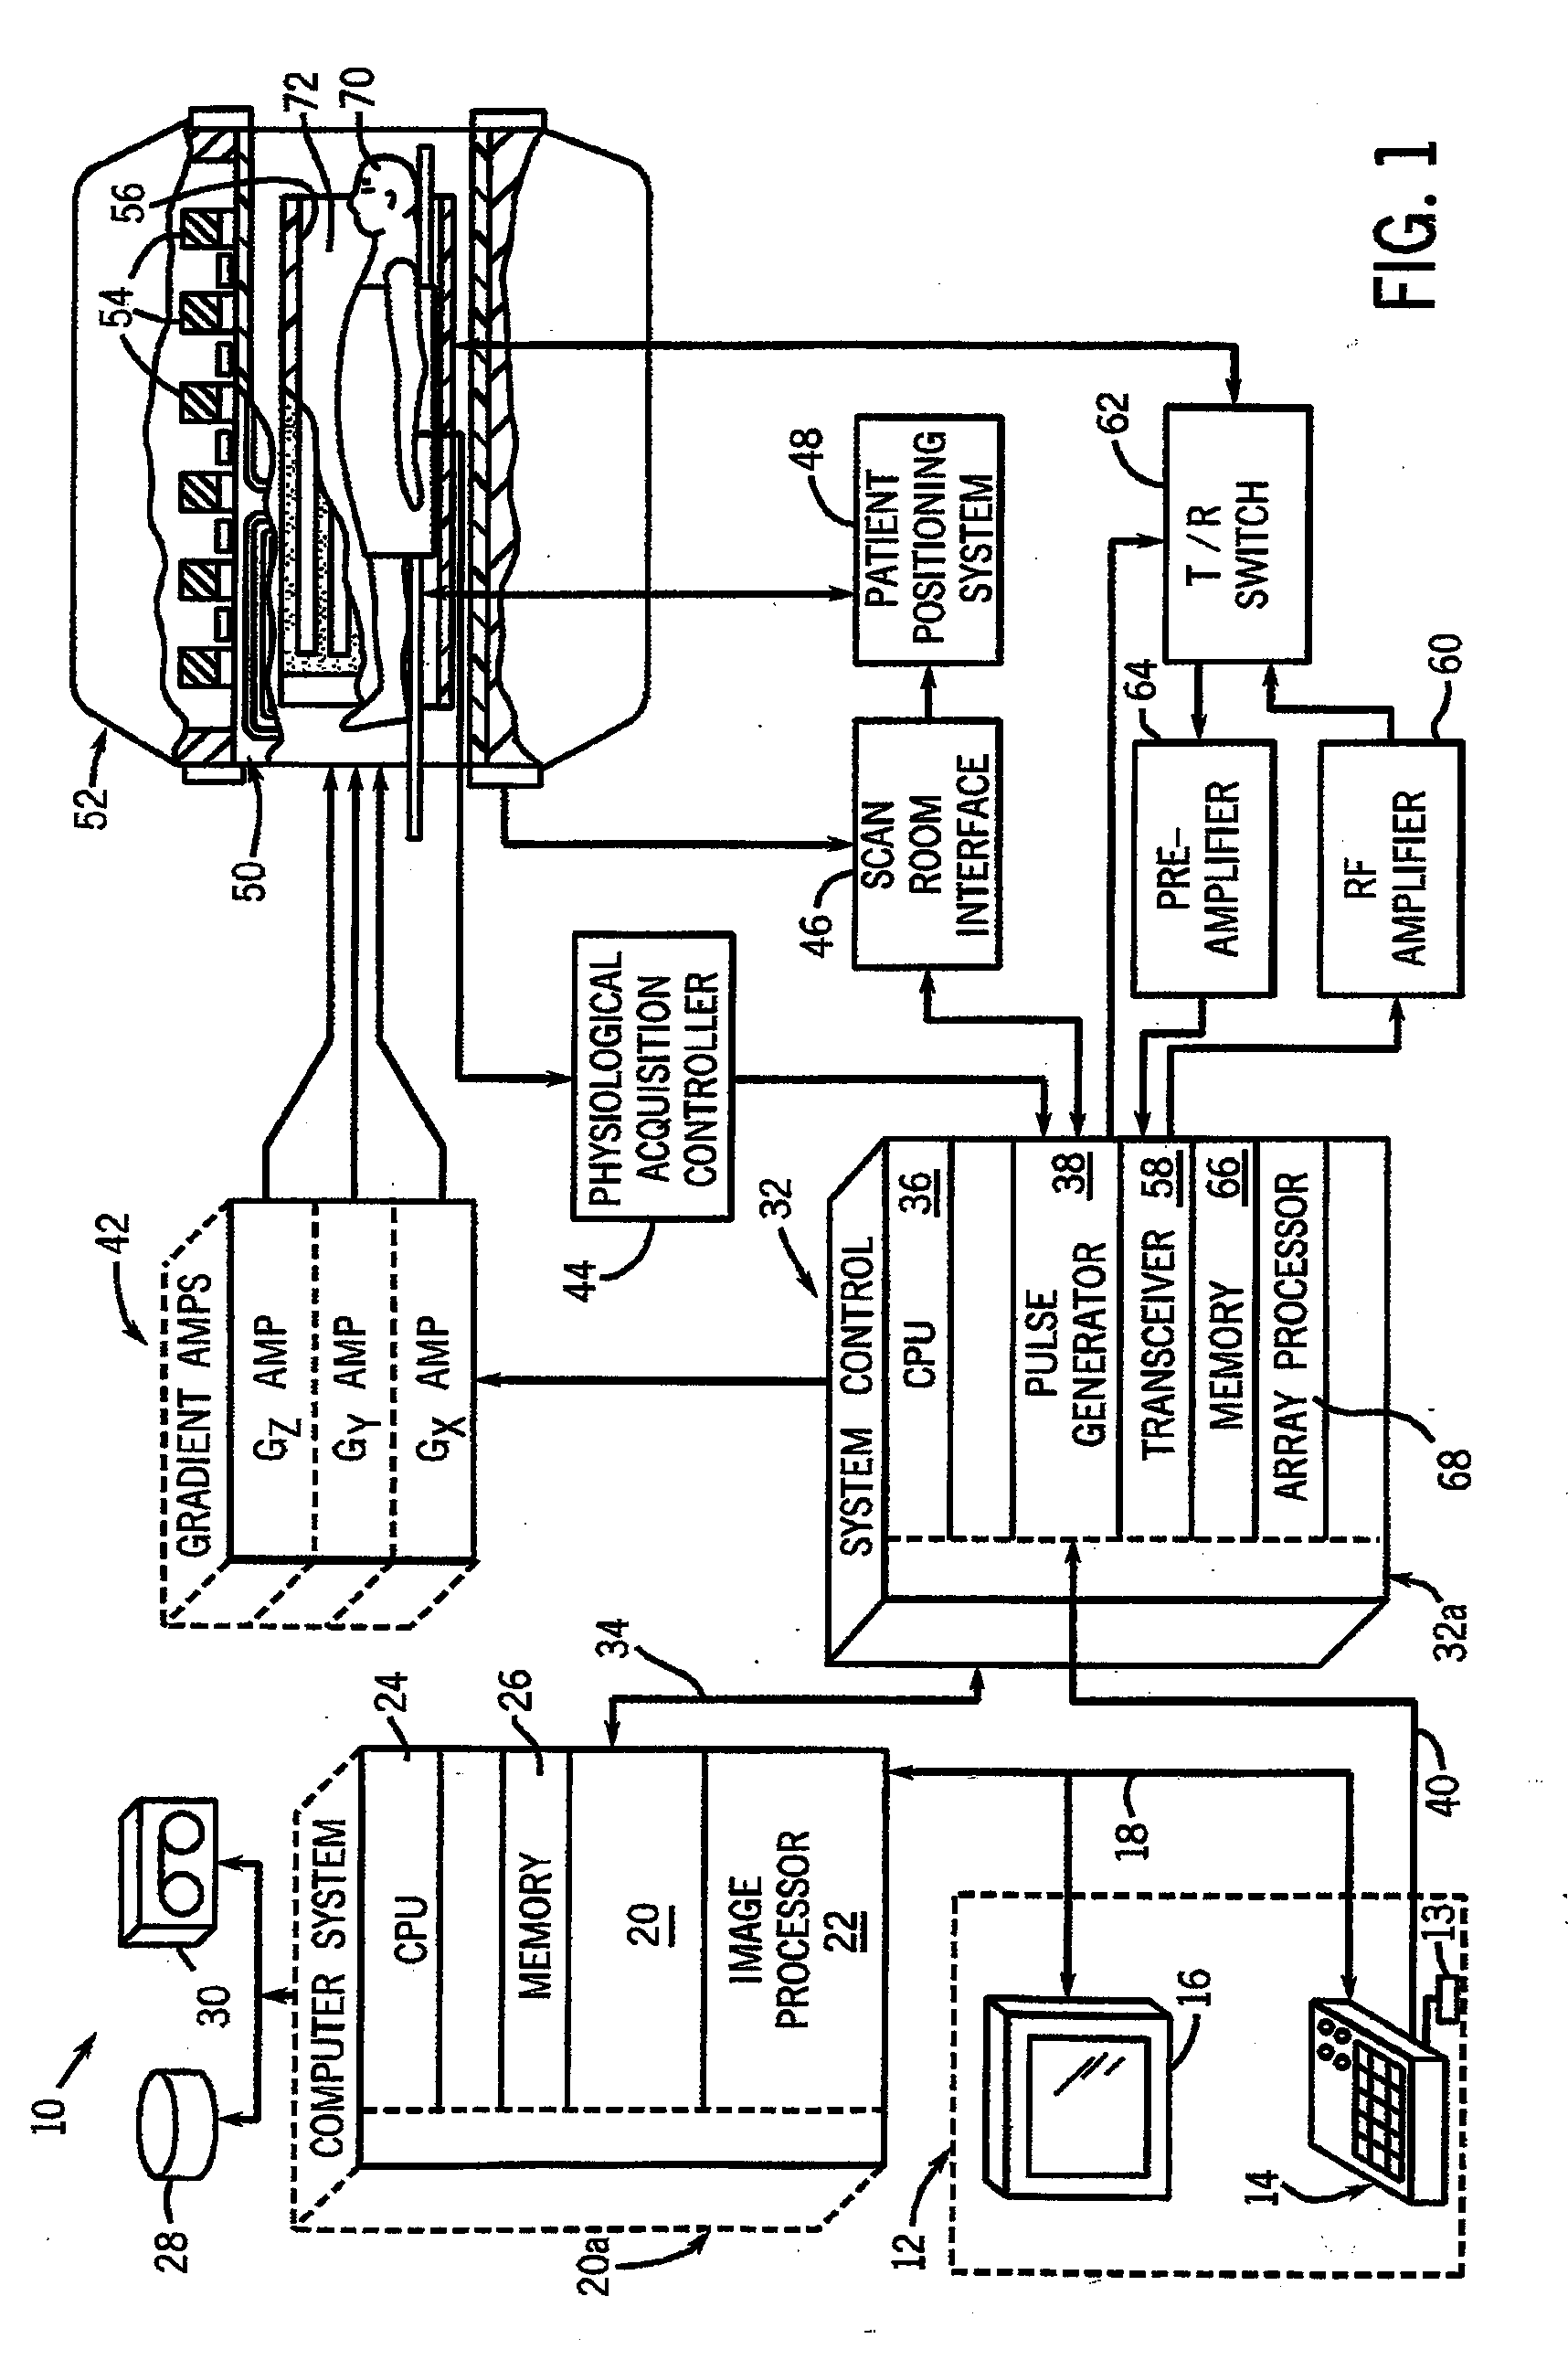 Method and apparatus for measuring t1 relaxation